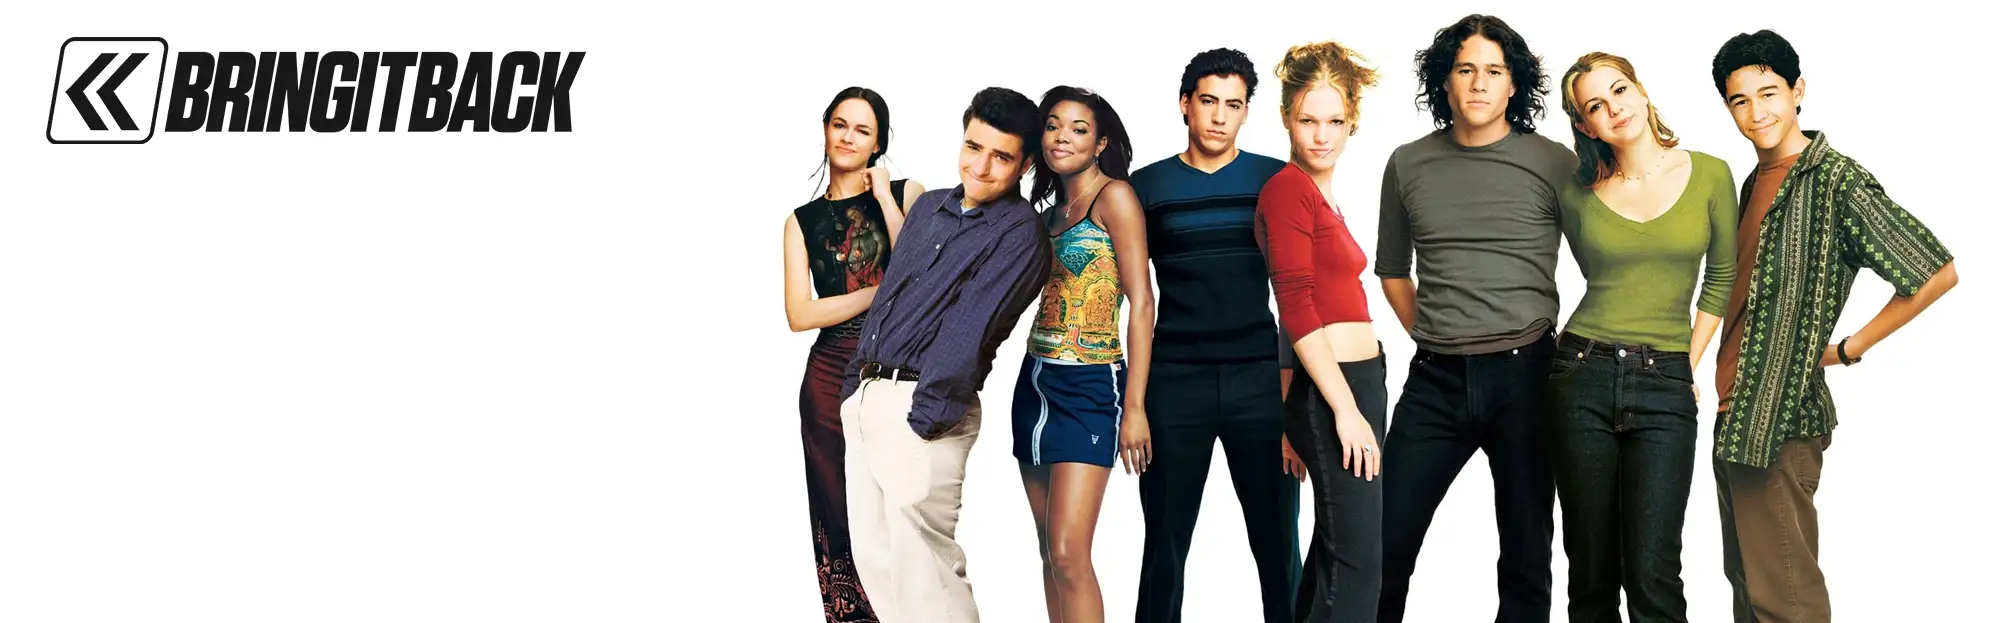 10 Things I Hate About You (Bring it Back)